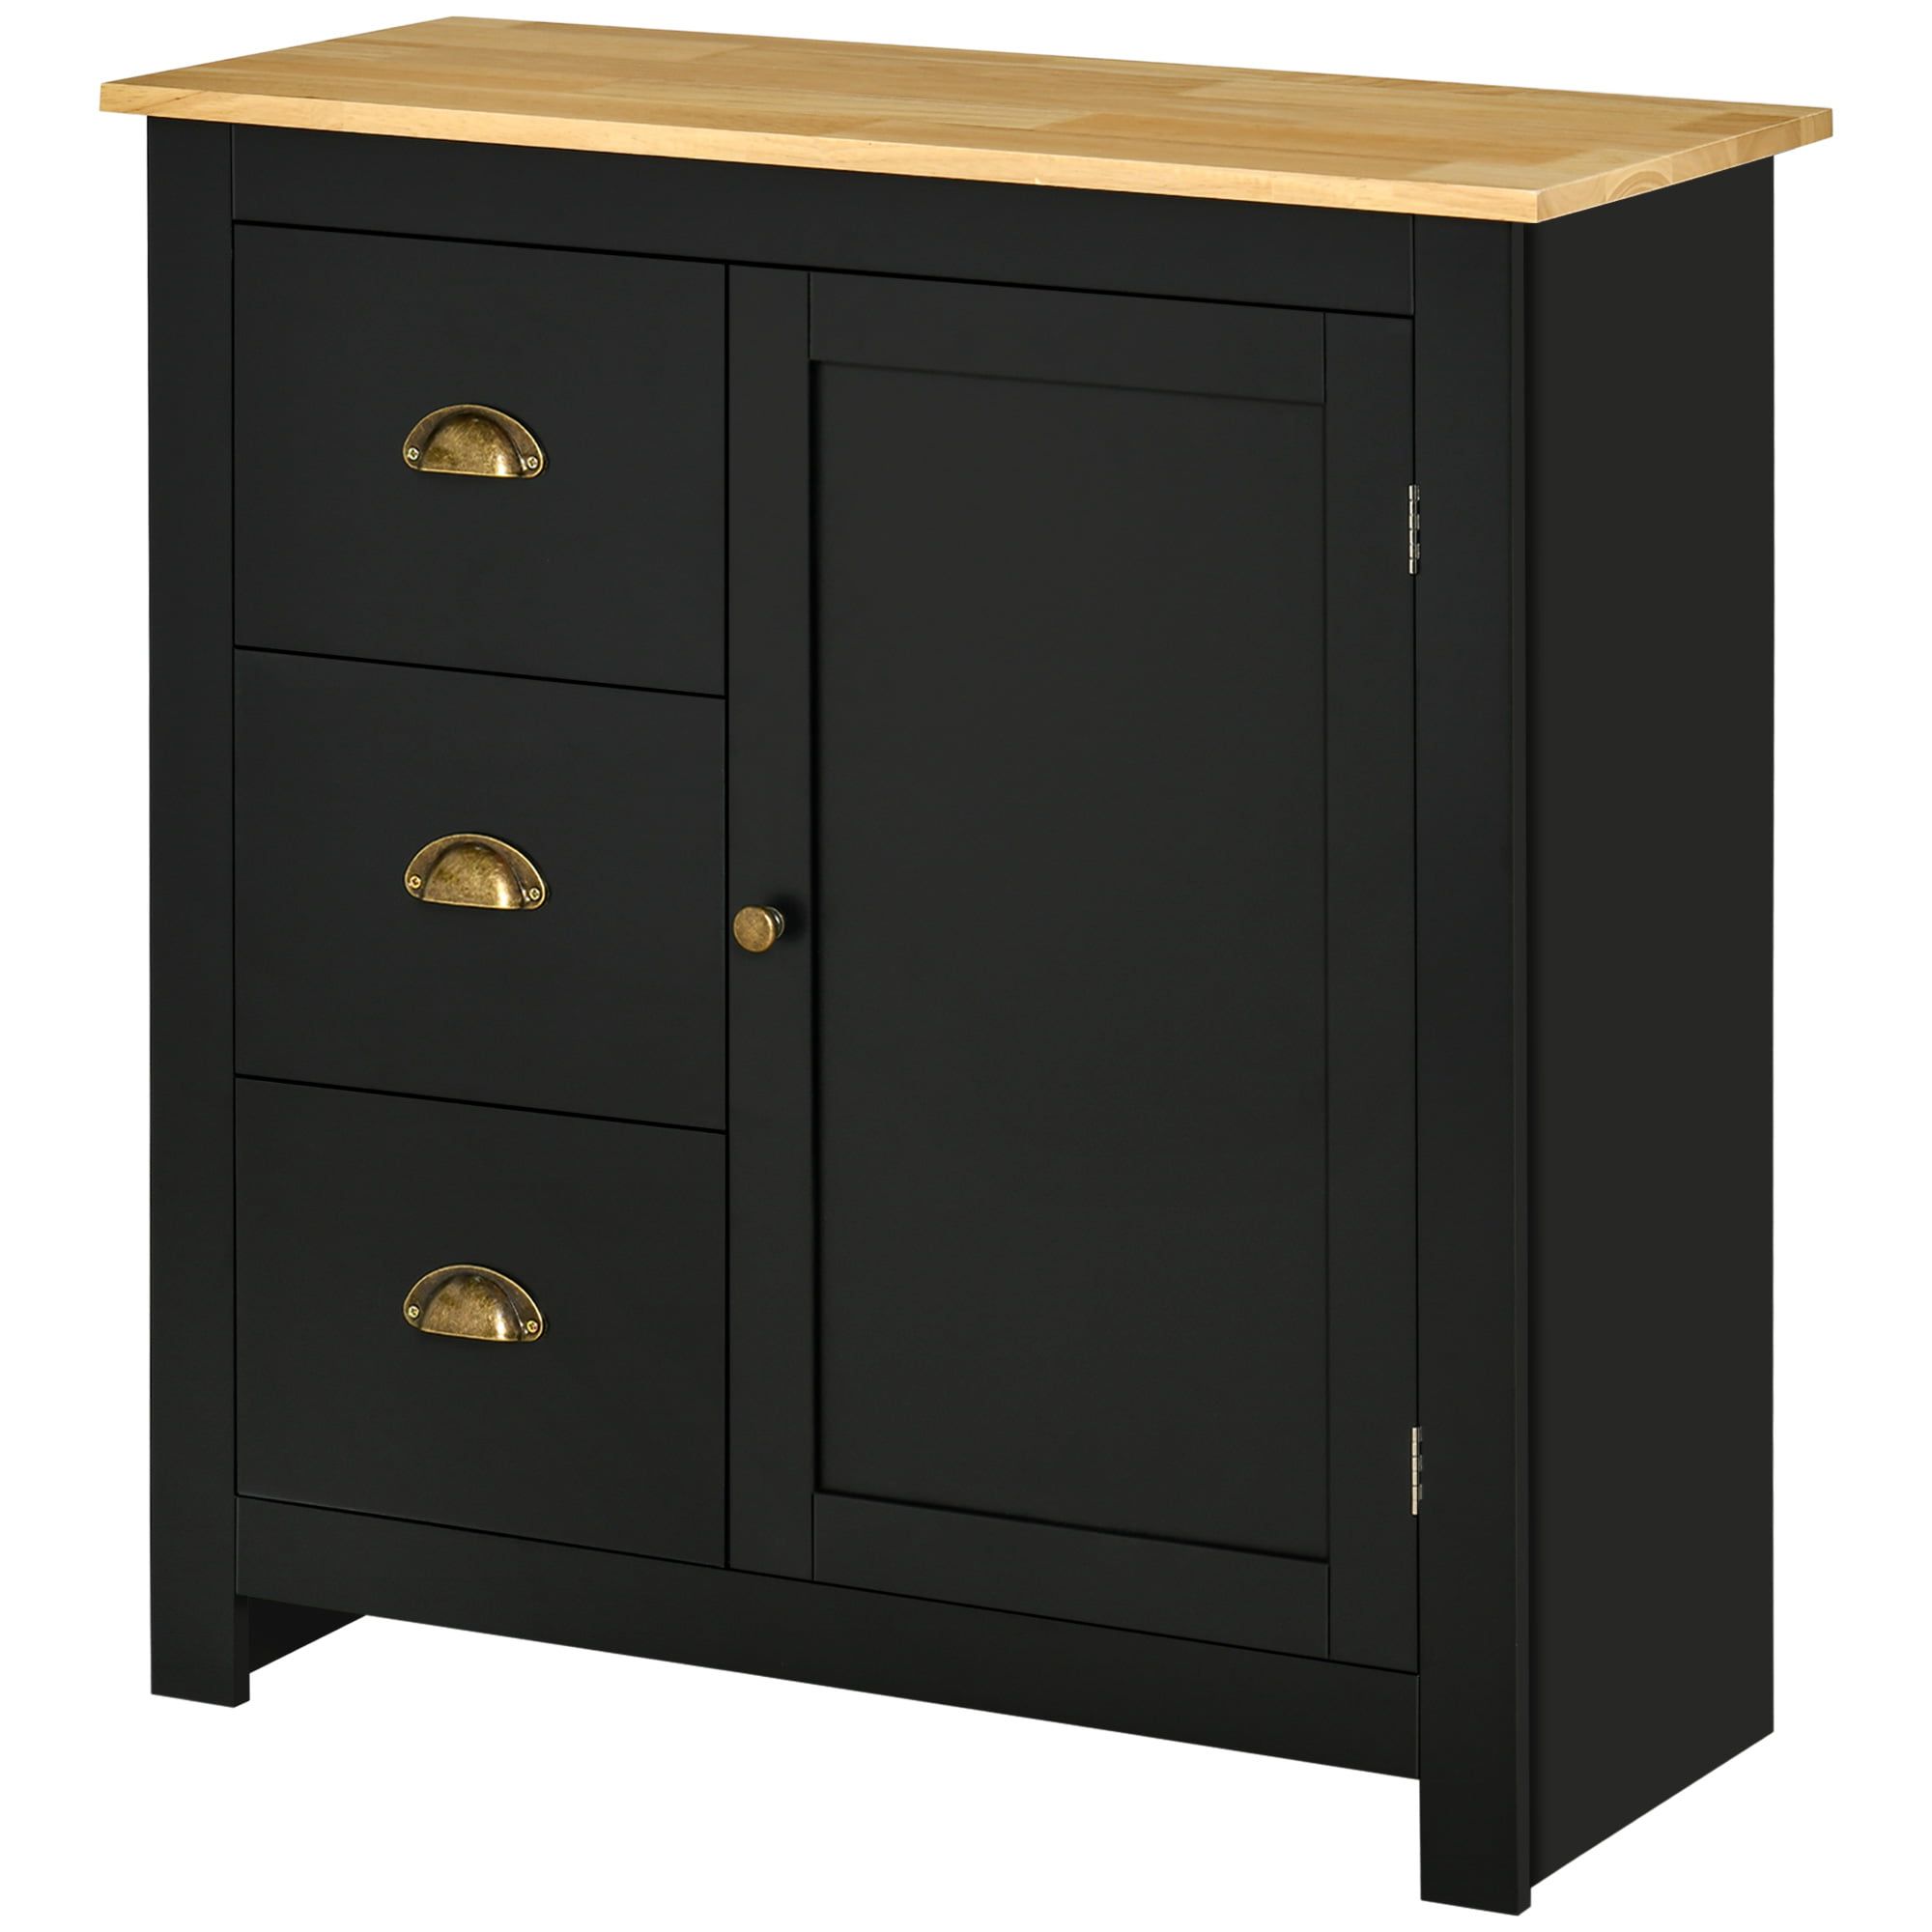 Recent Homcom Modern Kitchen Cabinet, Storage Sideboard, Buffet Table With Rubberwood  Top, 3 Drawers And Cabinet With Adjustable Shelf, Black – Walmart Regarding Sideboards With Rubberwood Top (View 7 of 10)